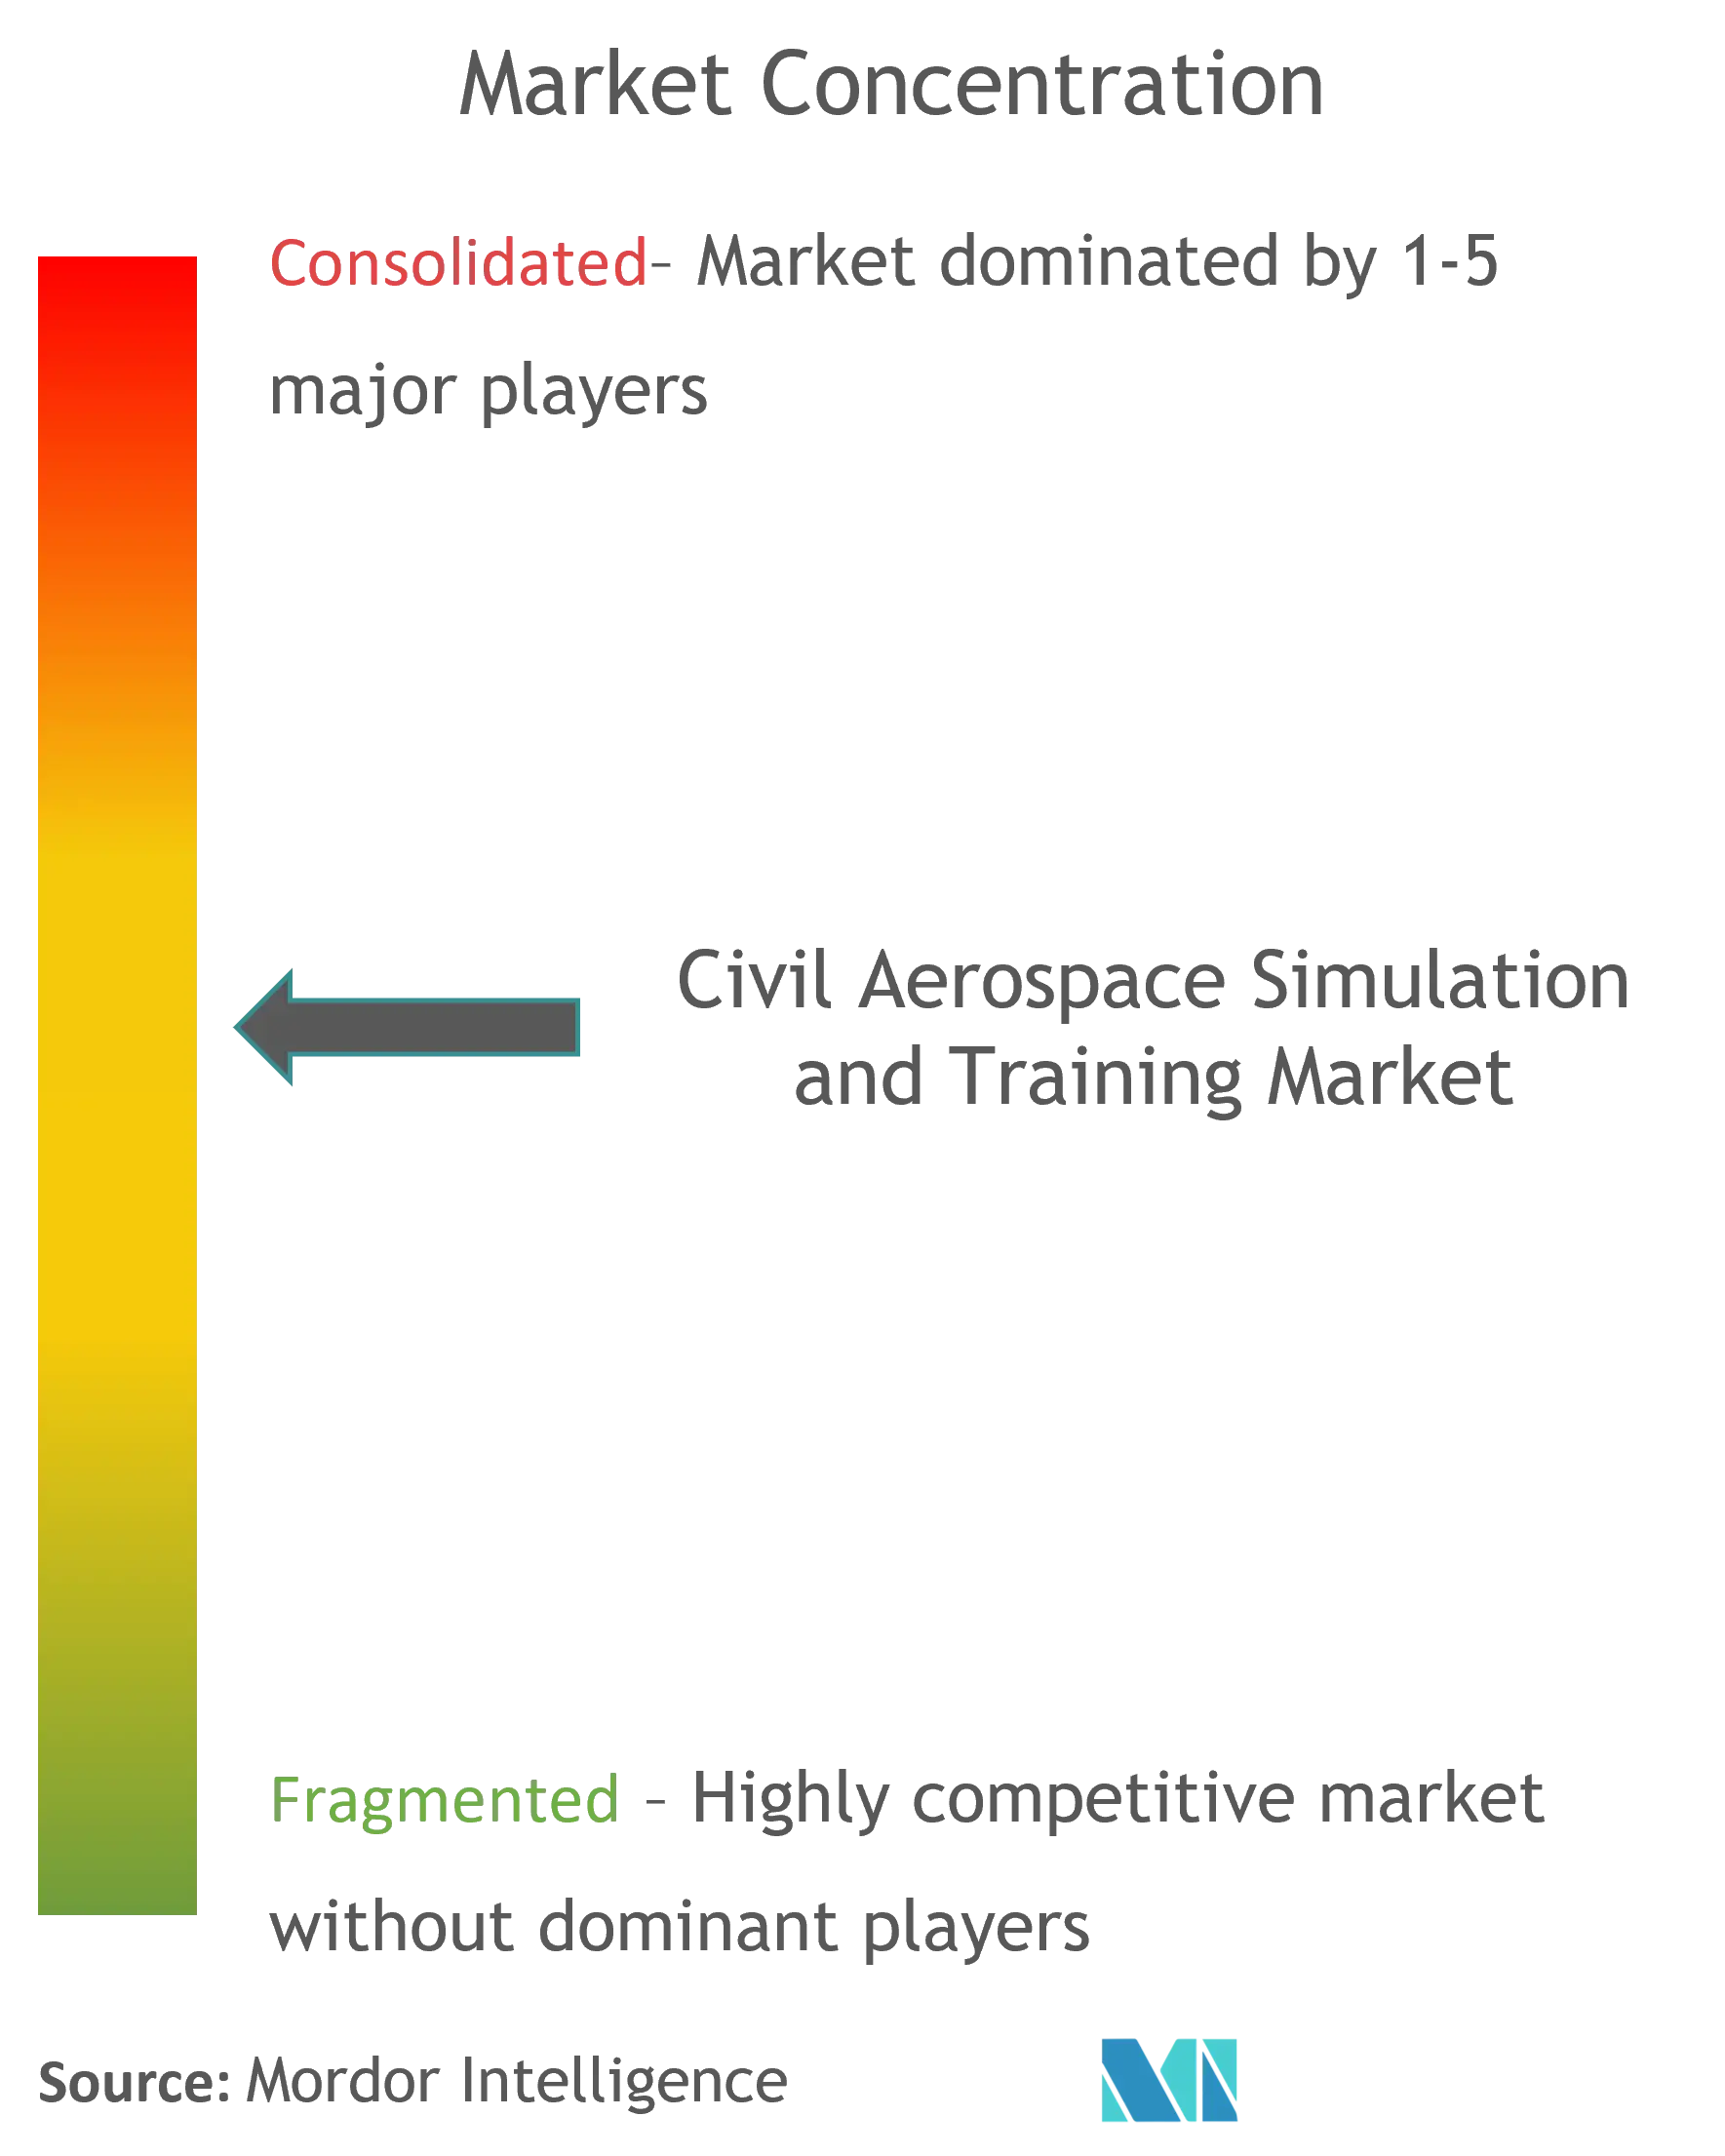 civil aerospace simulation and training market CL updated.png